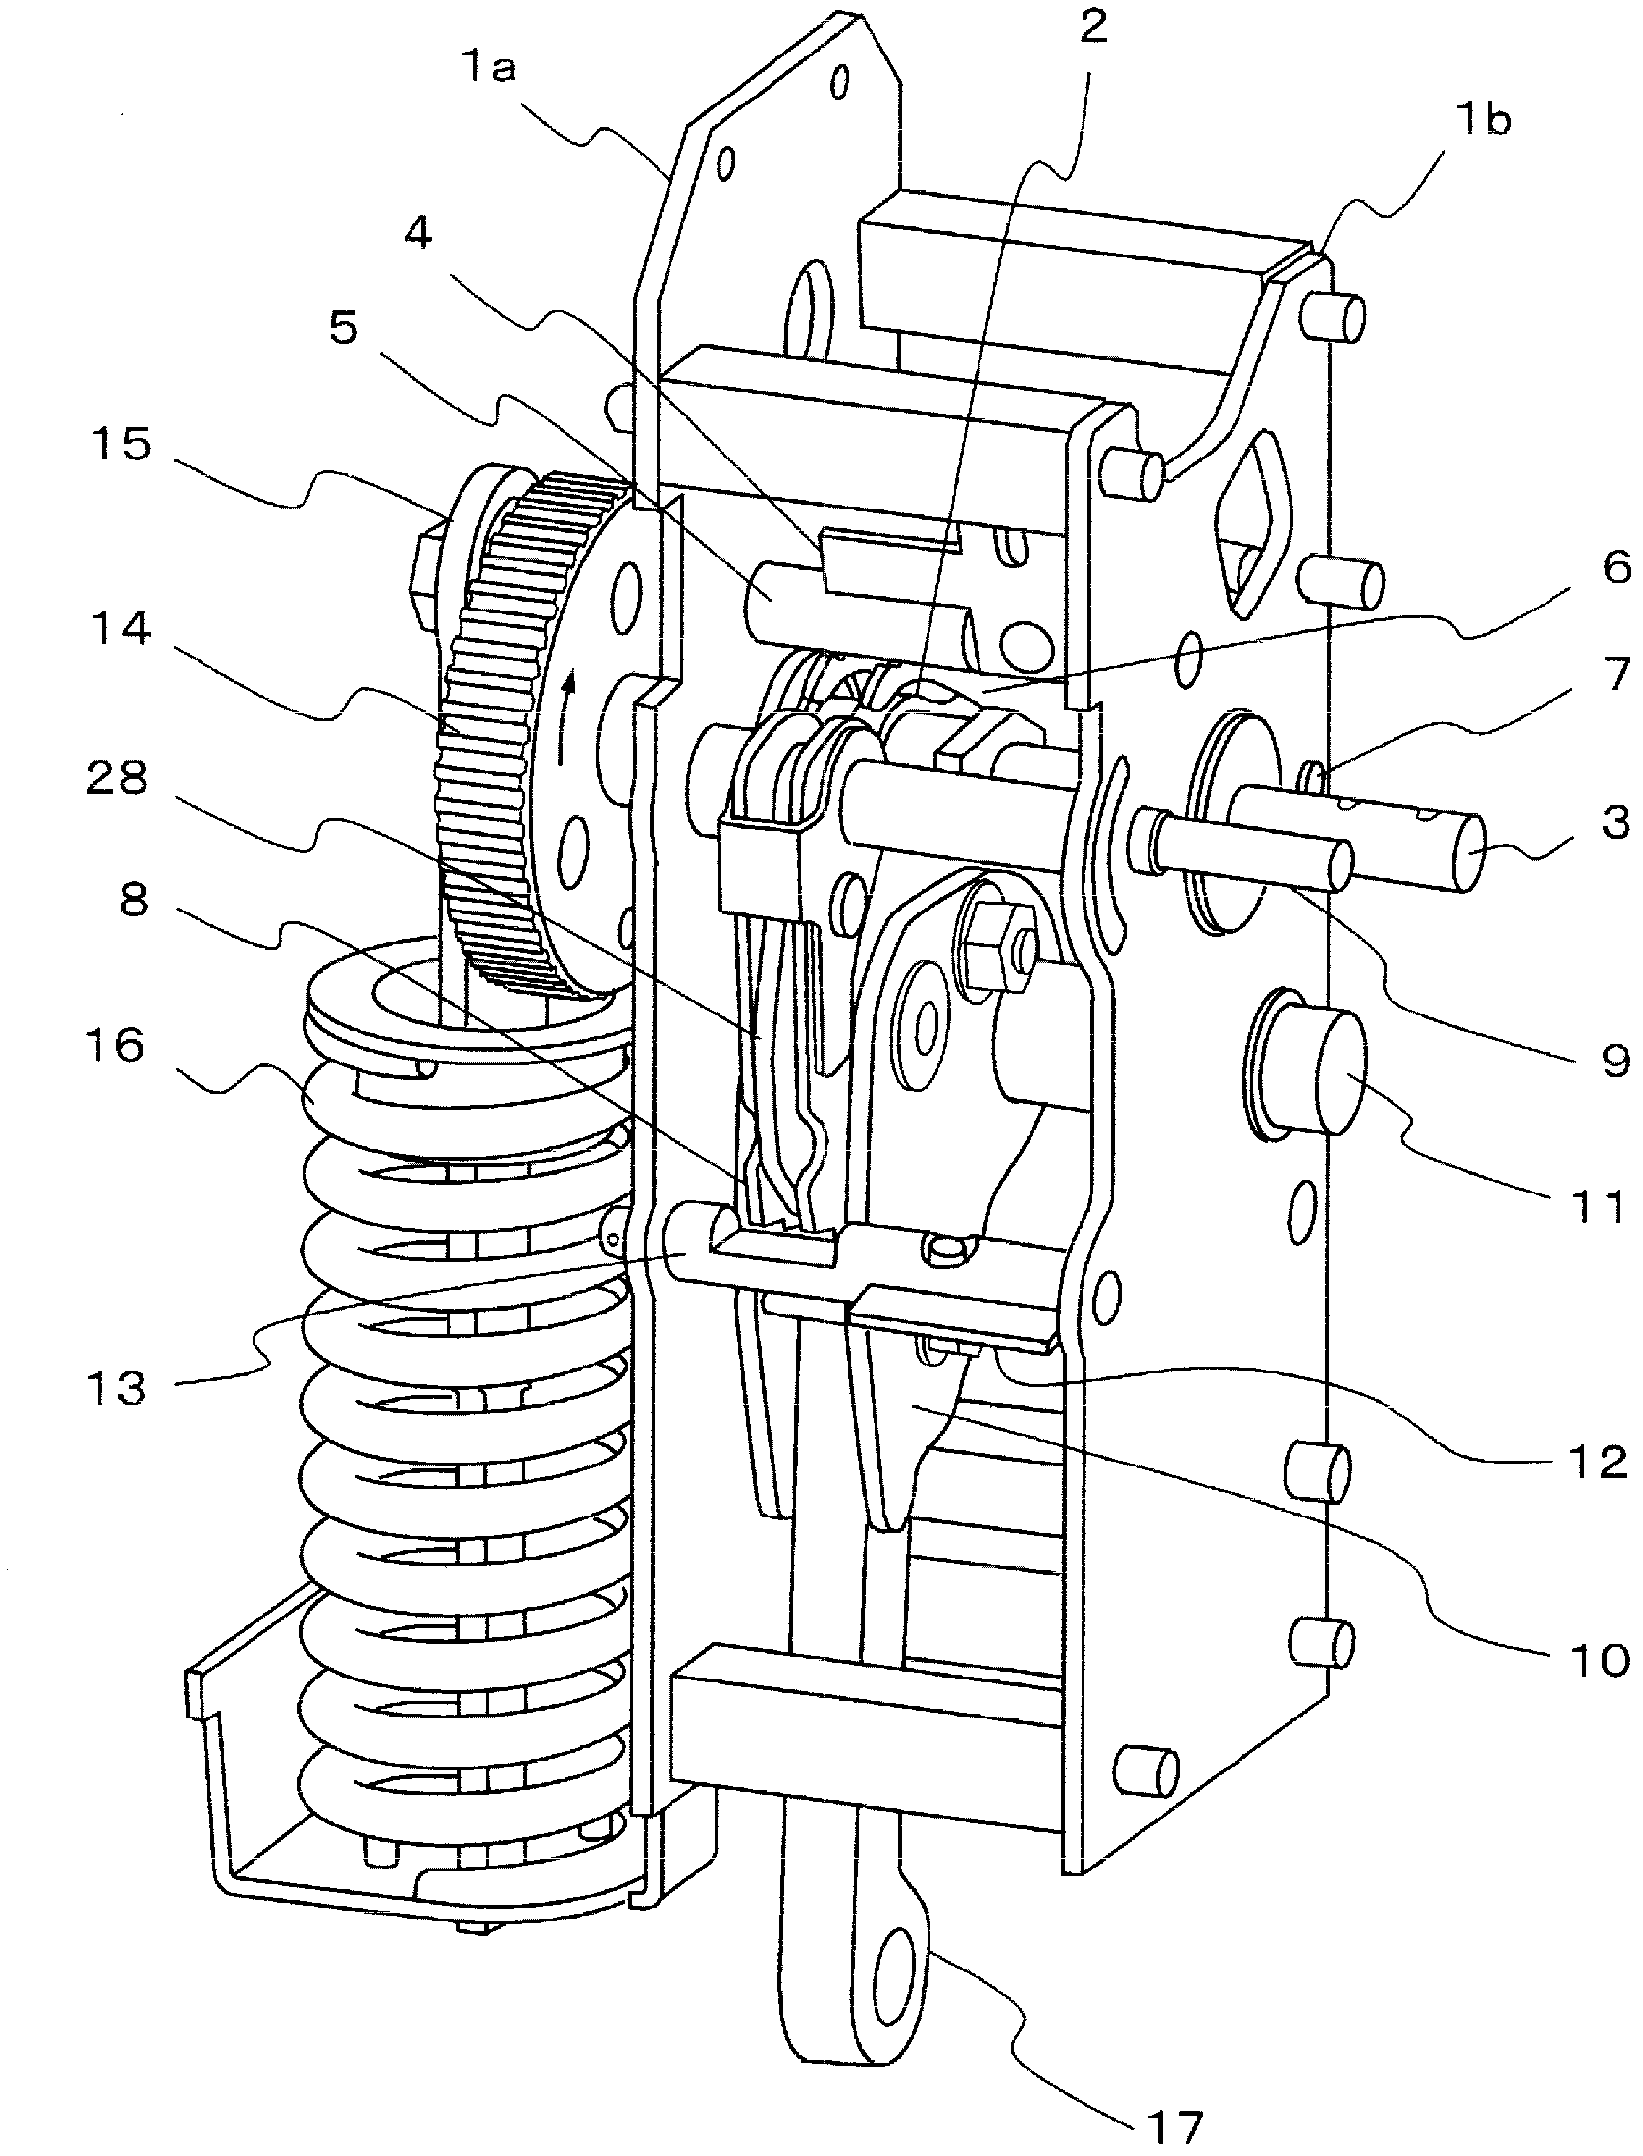 Switch device operating mechanism